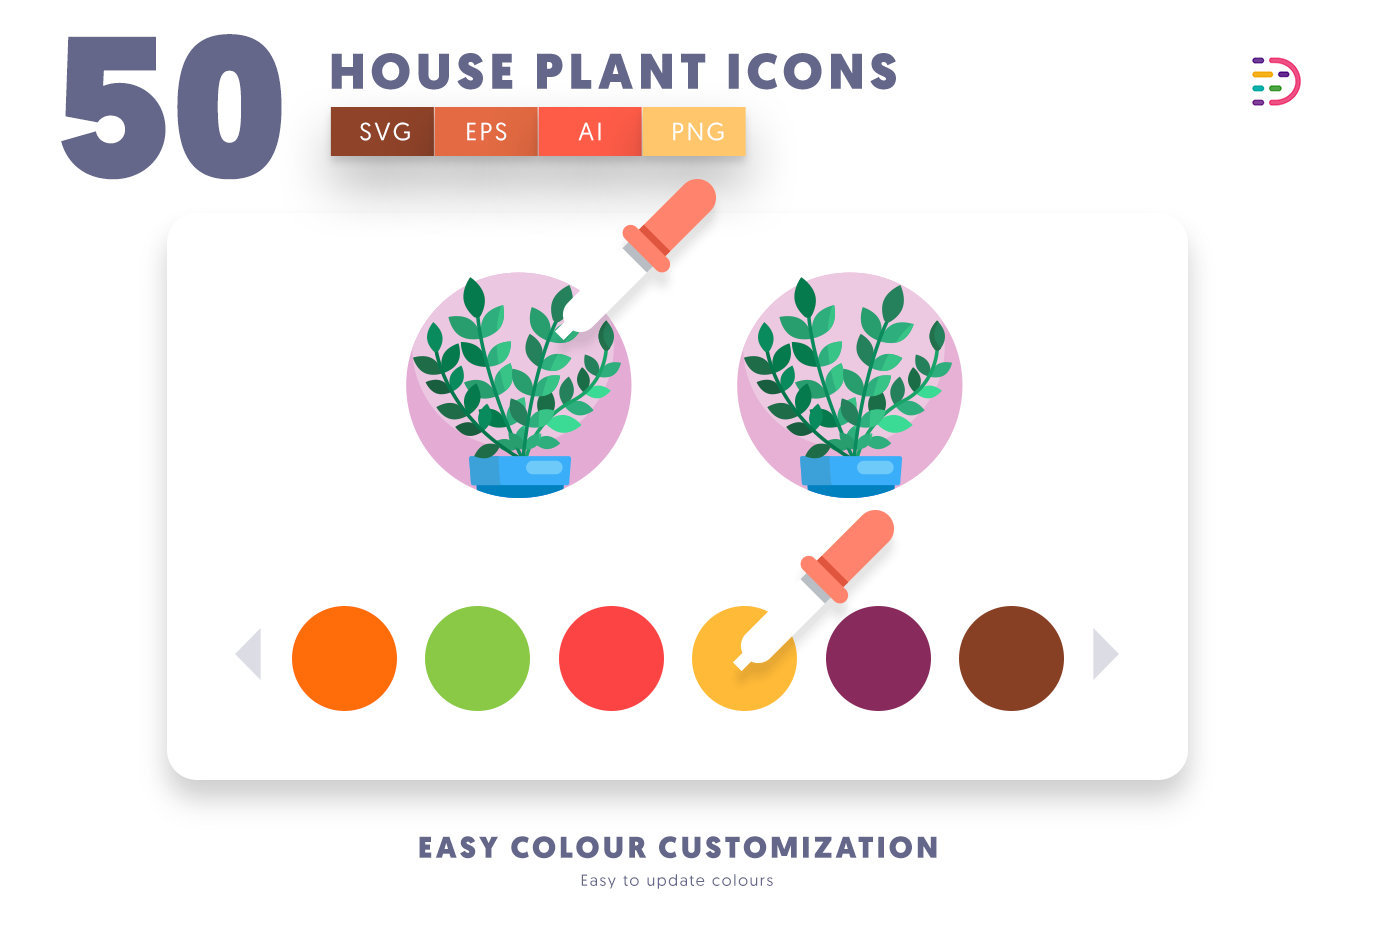 EPS, SVG, PNG full vector 50 House Plant Icons